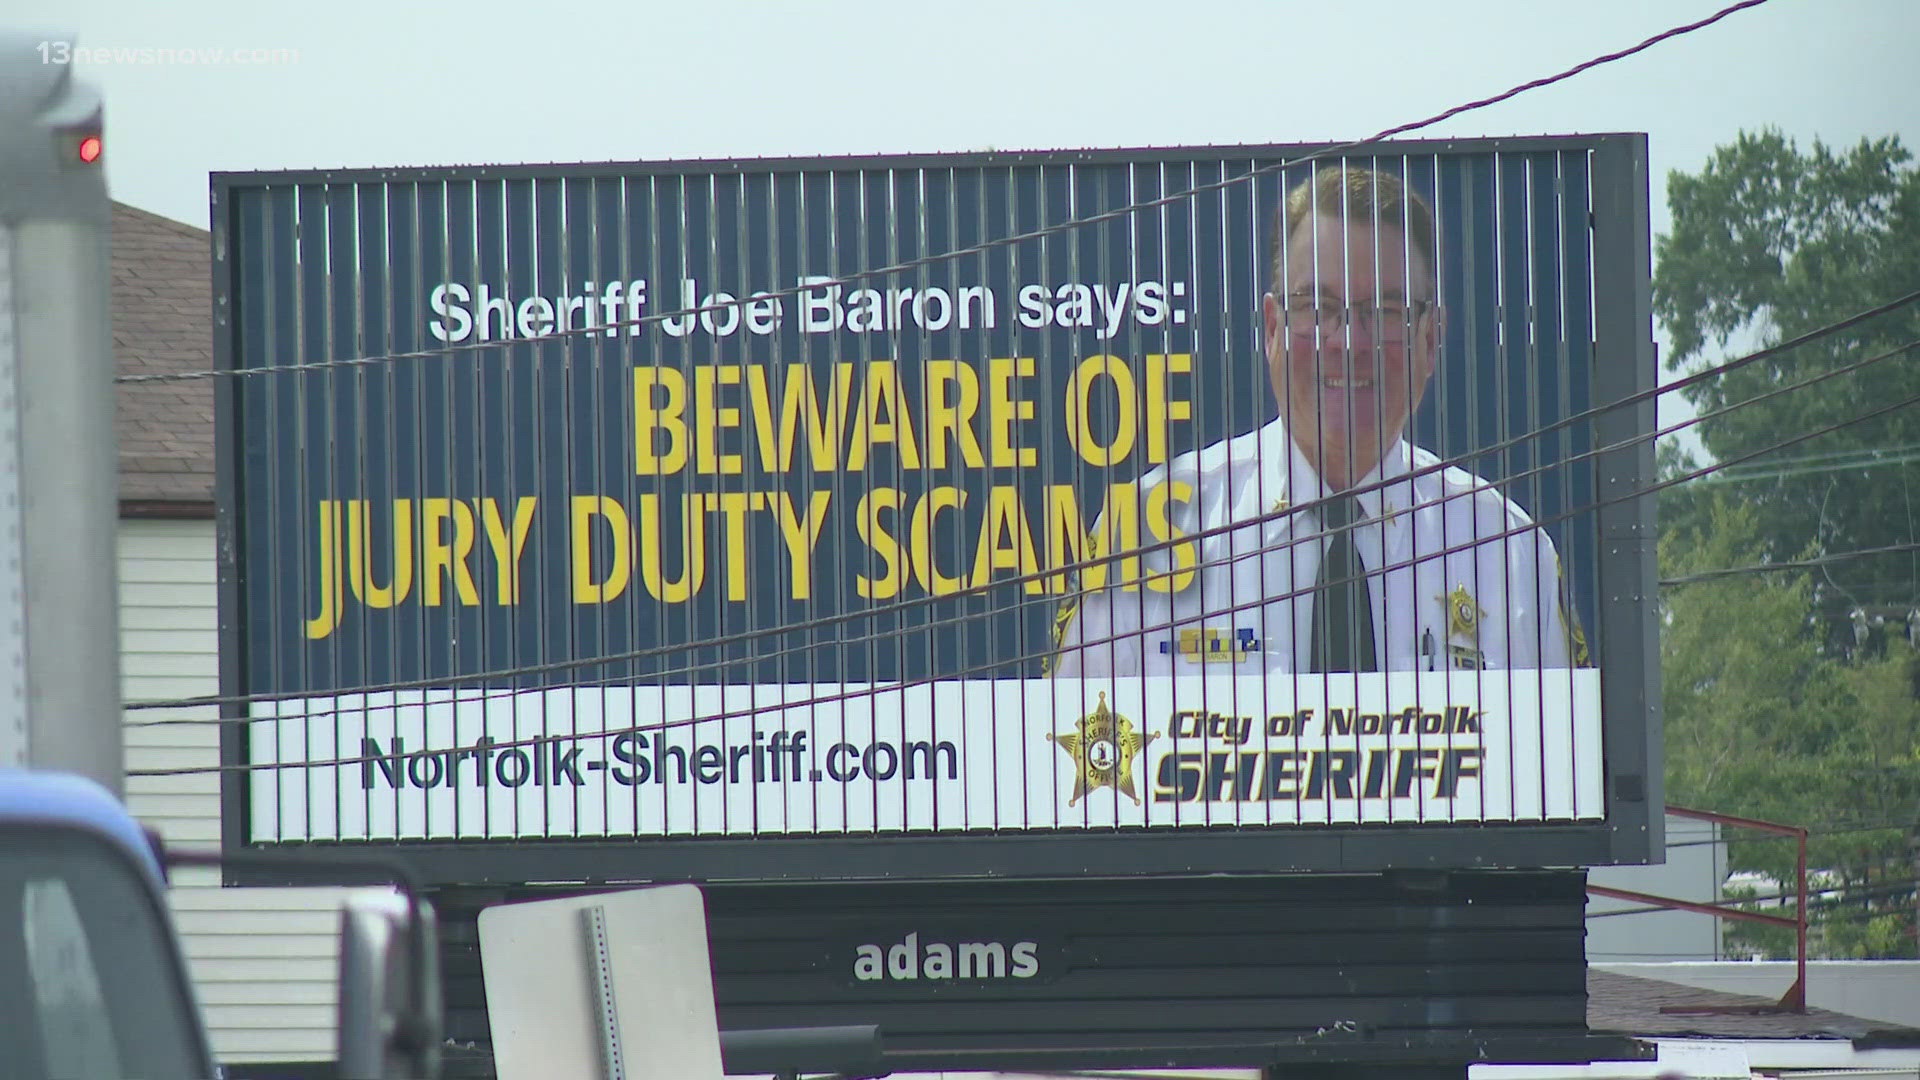 The Norfolk Sheriff's Office says scammers are calling residents telling them they must pay a fine for missing jury duty.